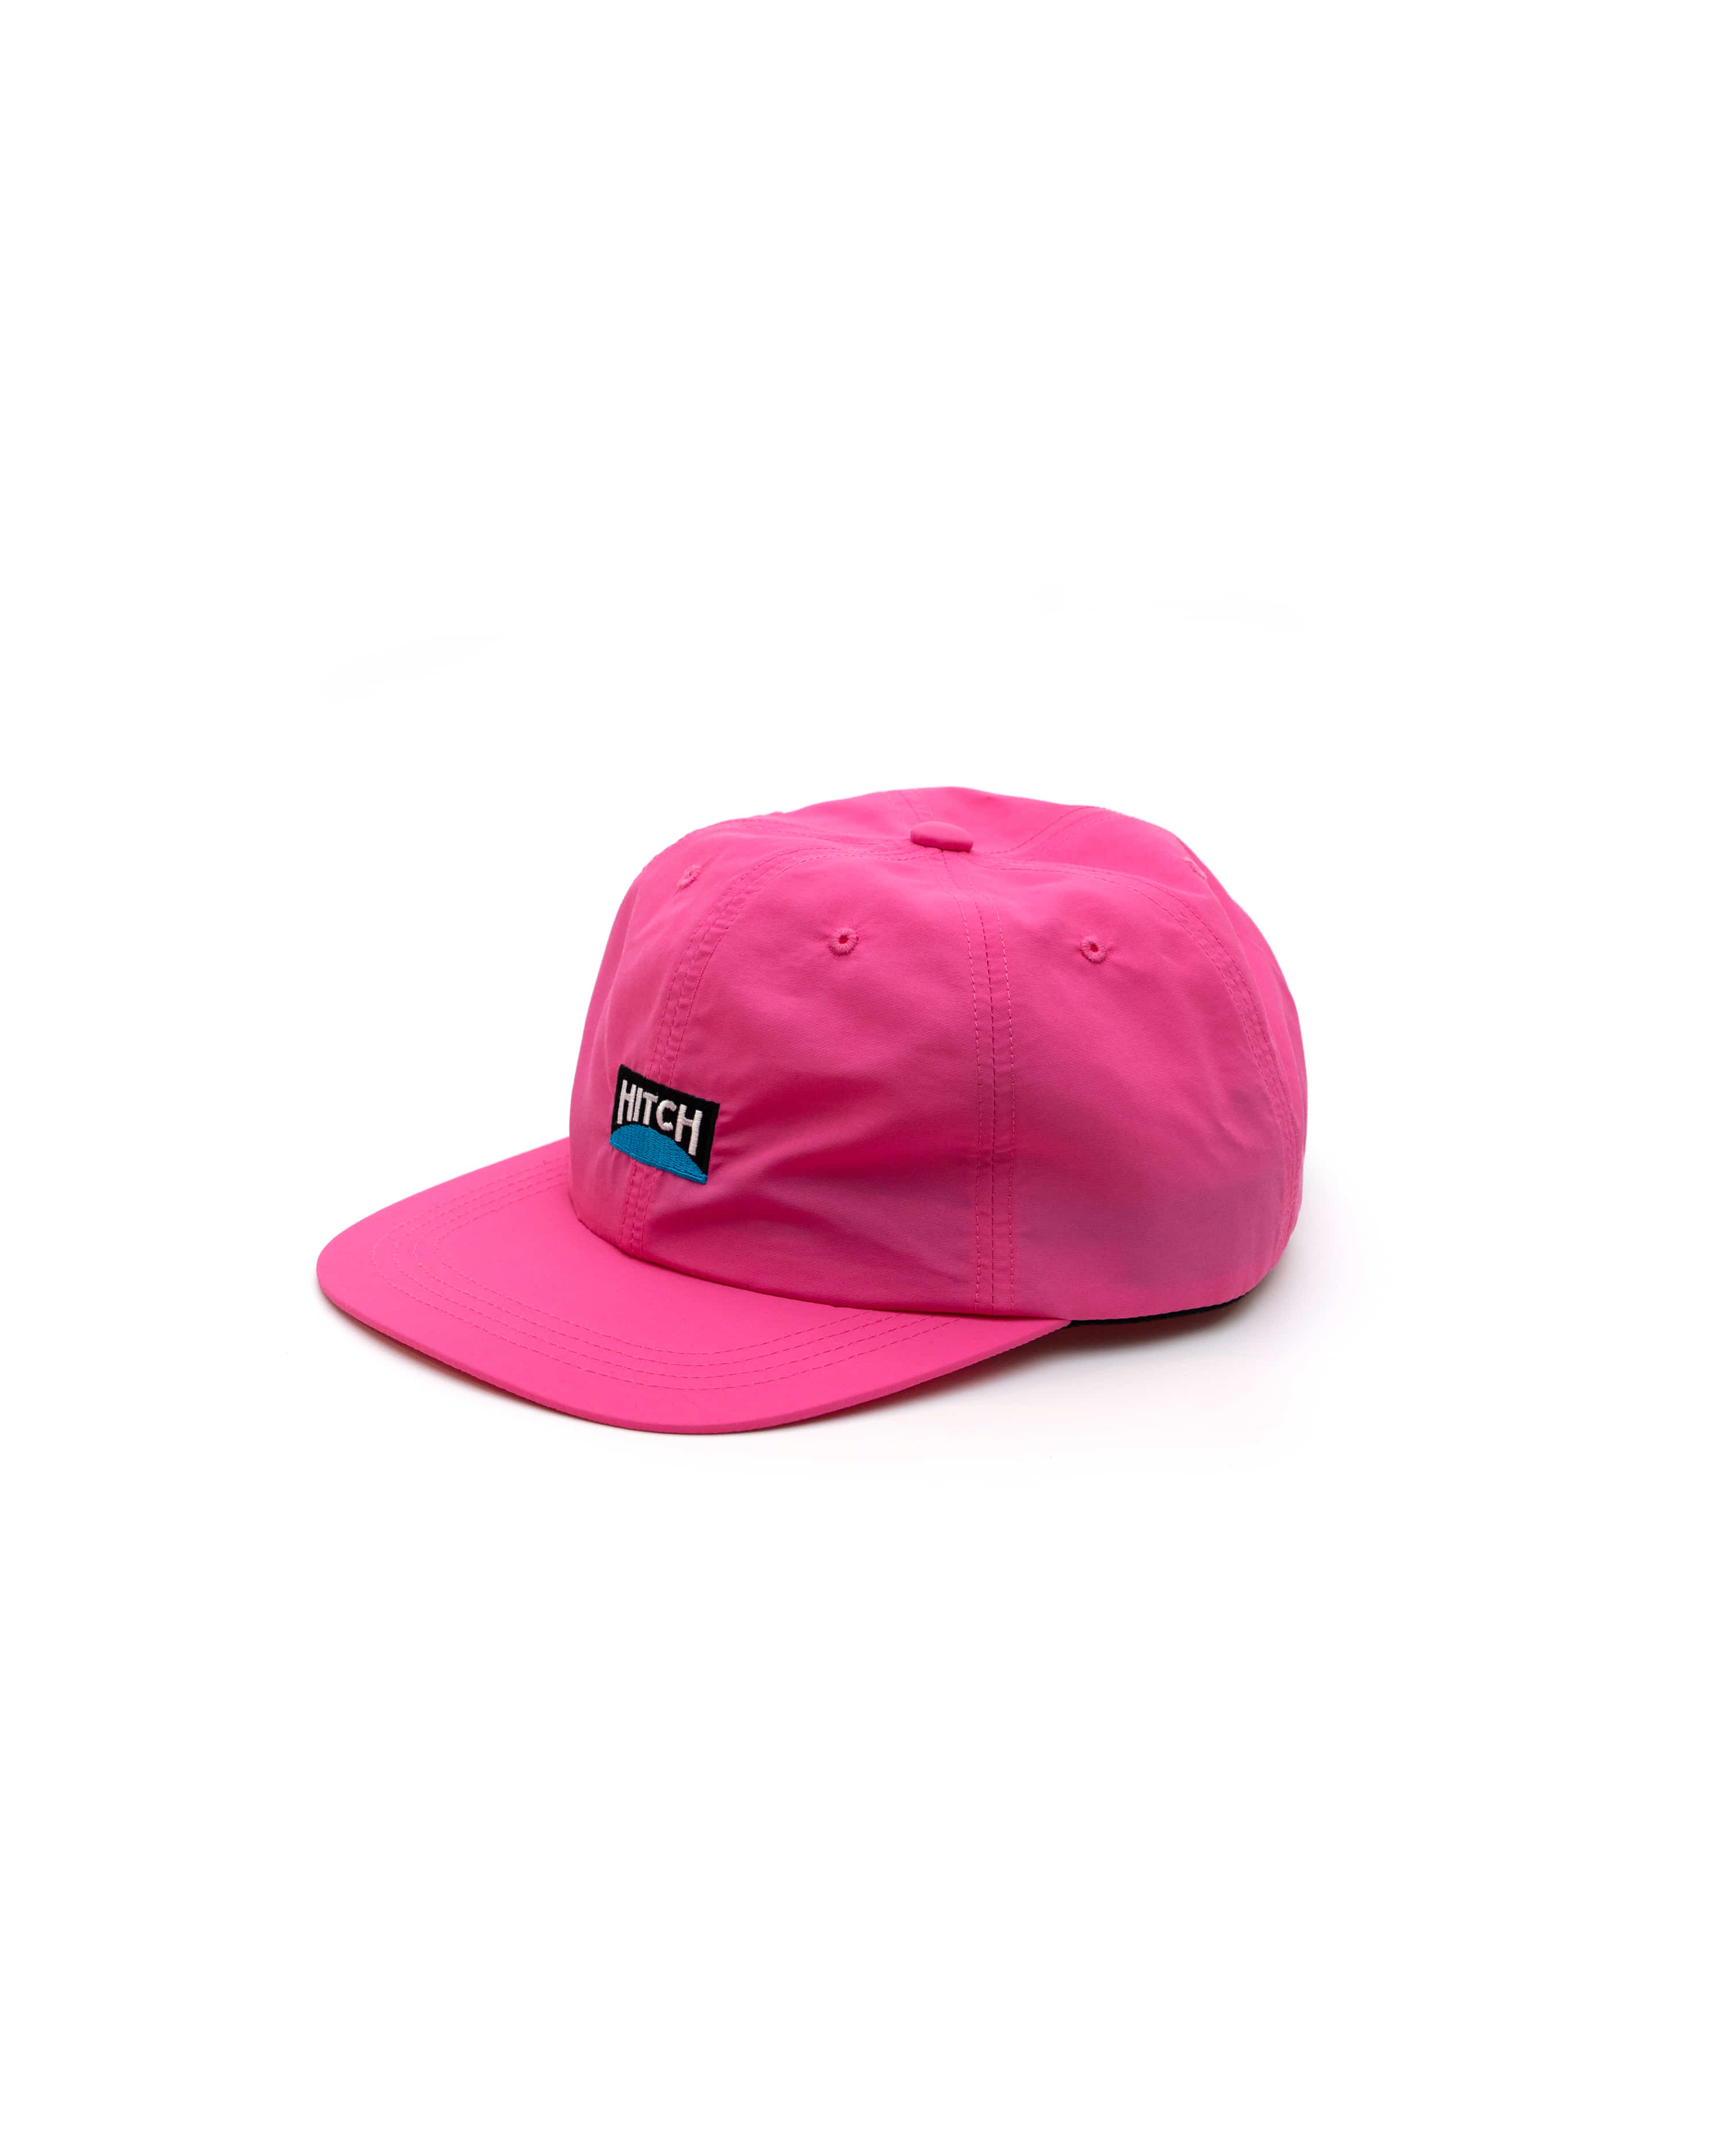 [out of stock] Skate 1 - Pink